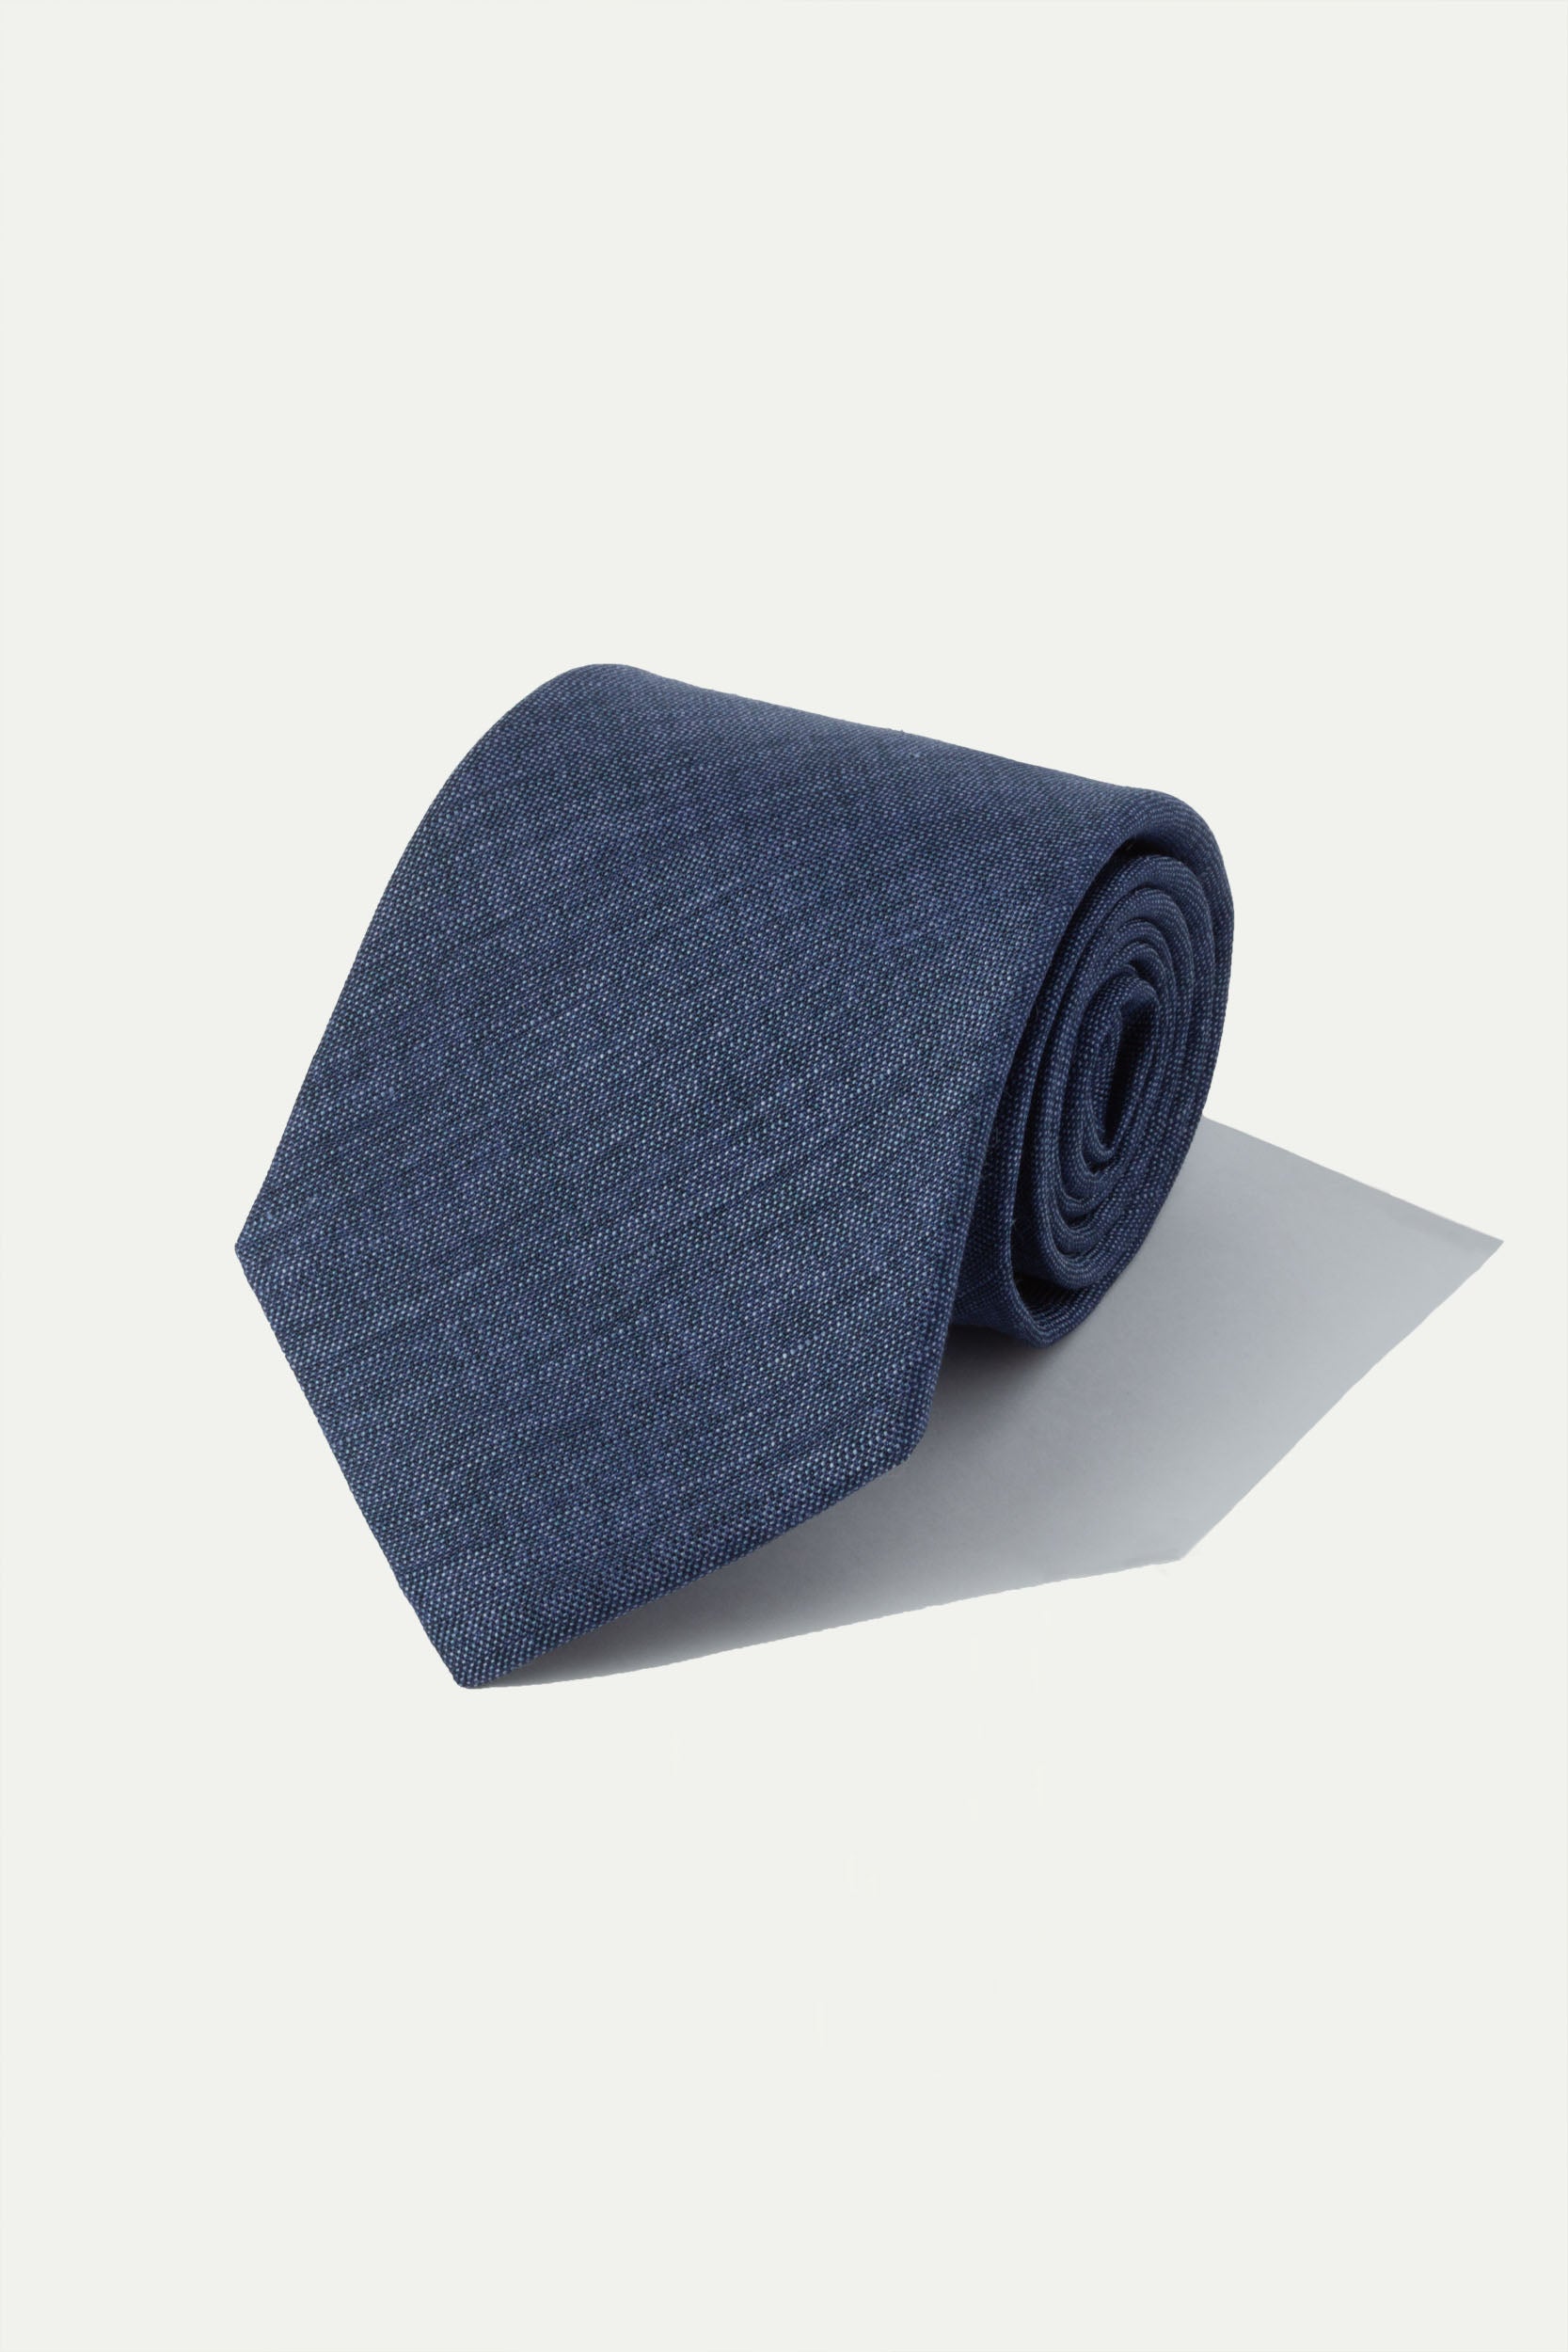 Blue printed silk tie - Made In Italy